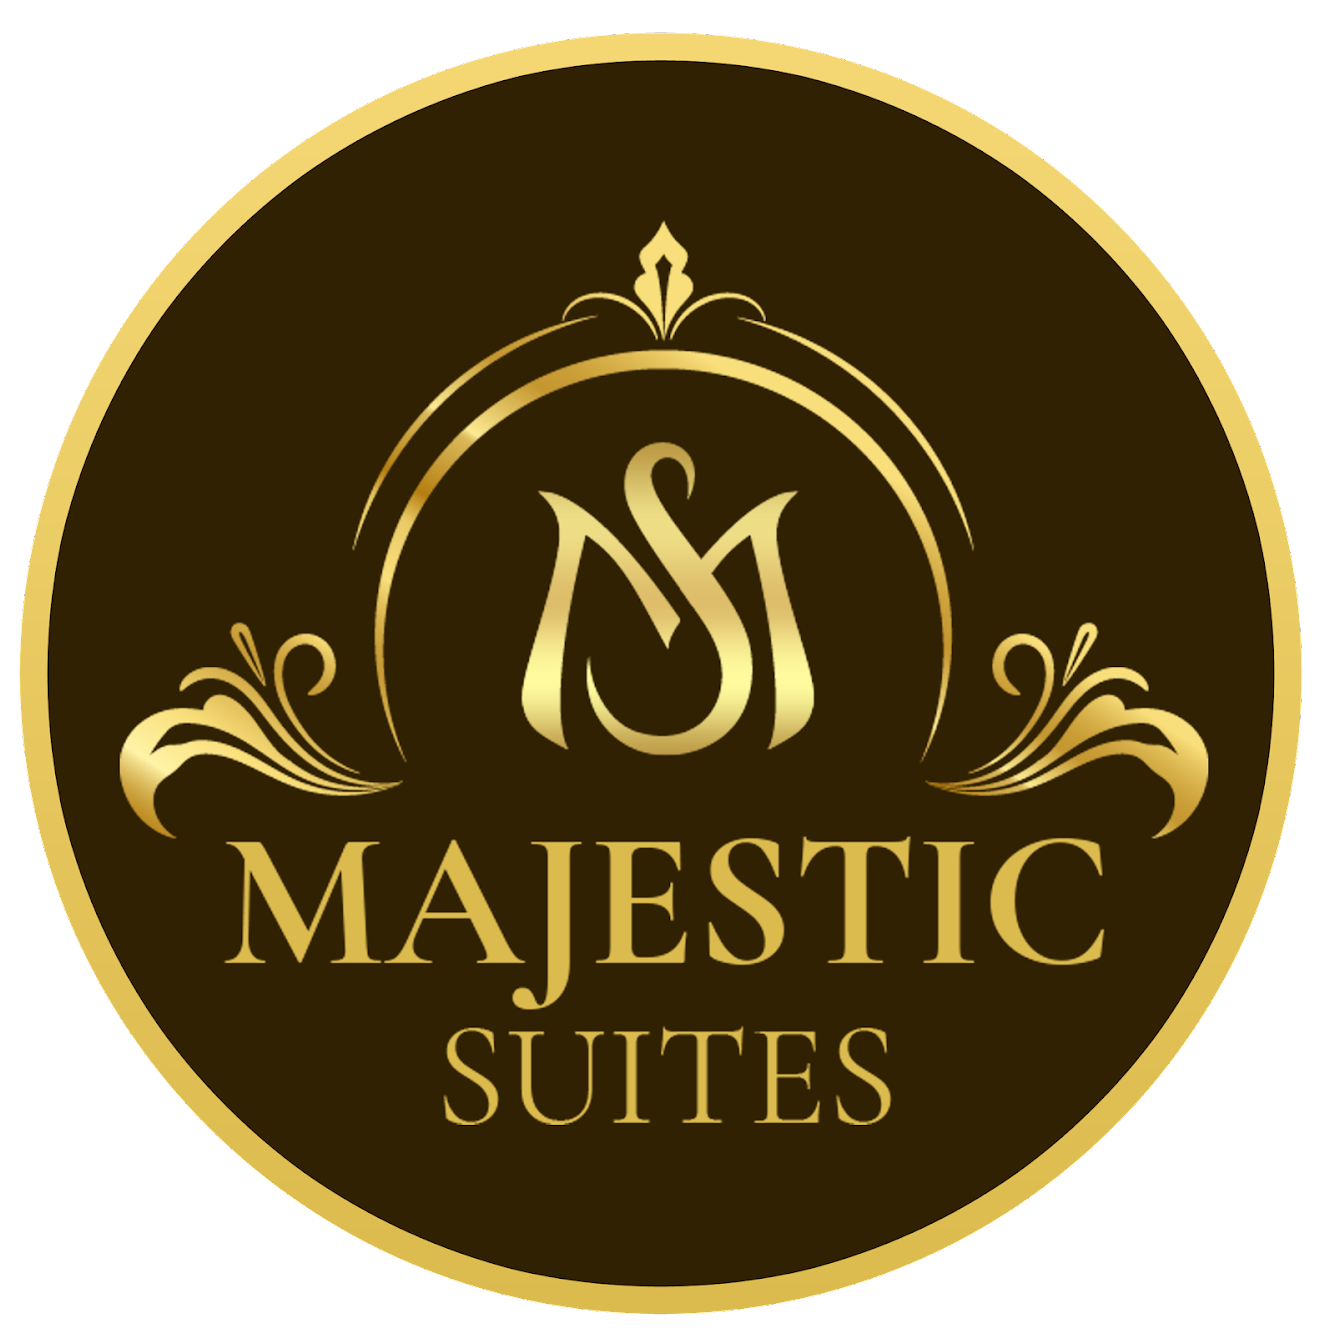 THE MAJESTIC SUITES